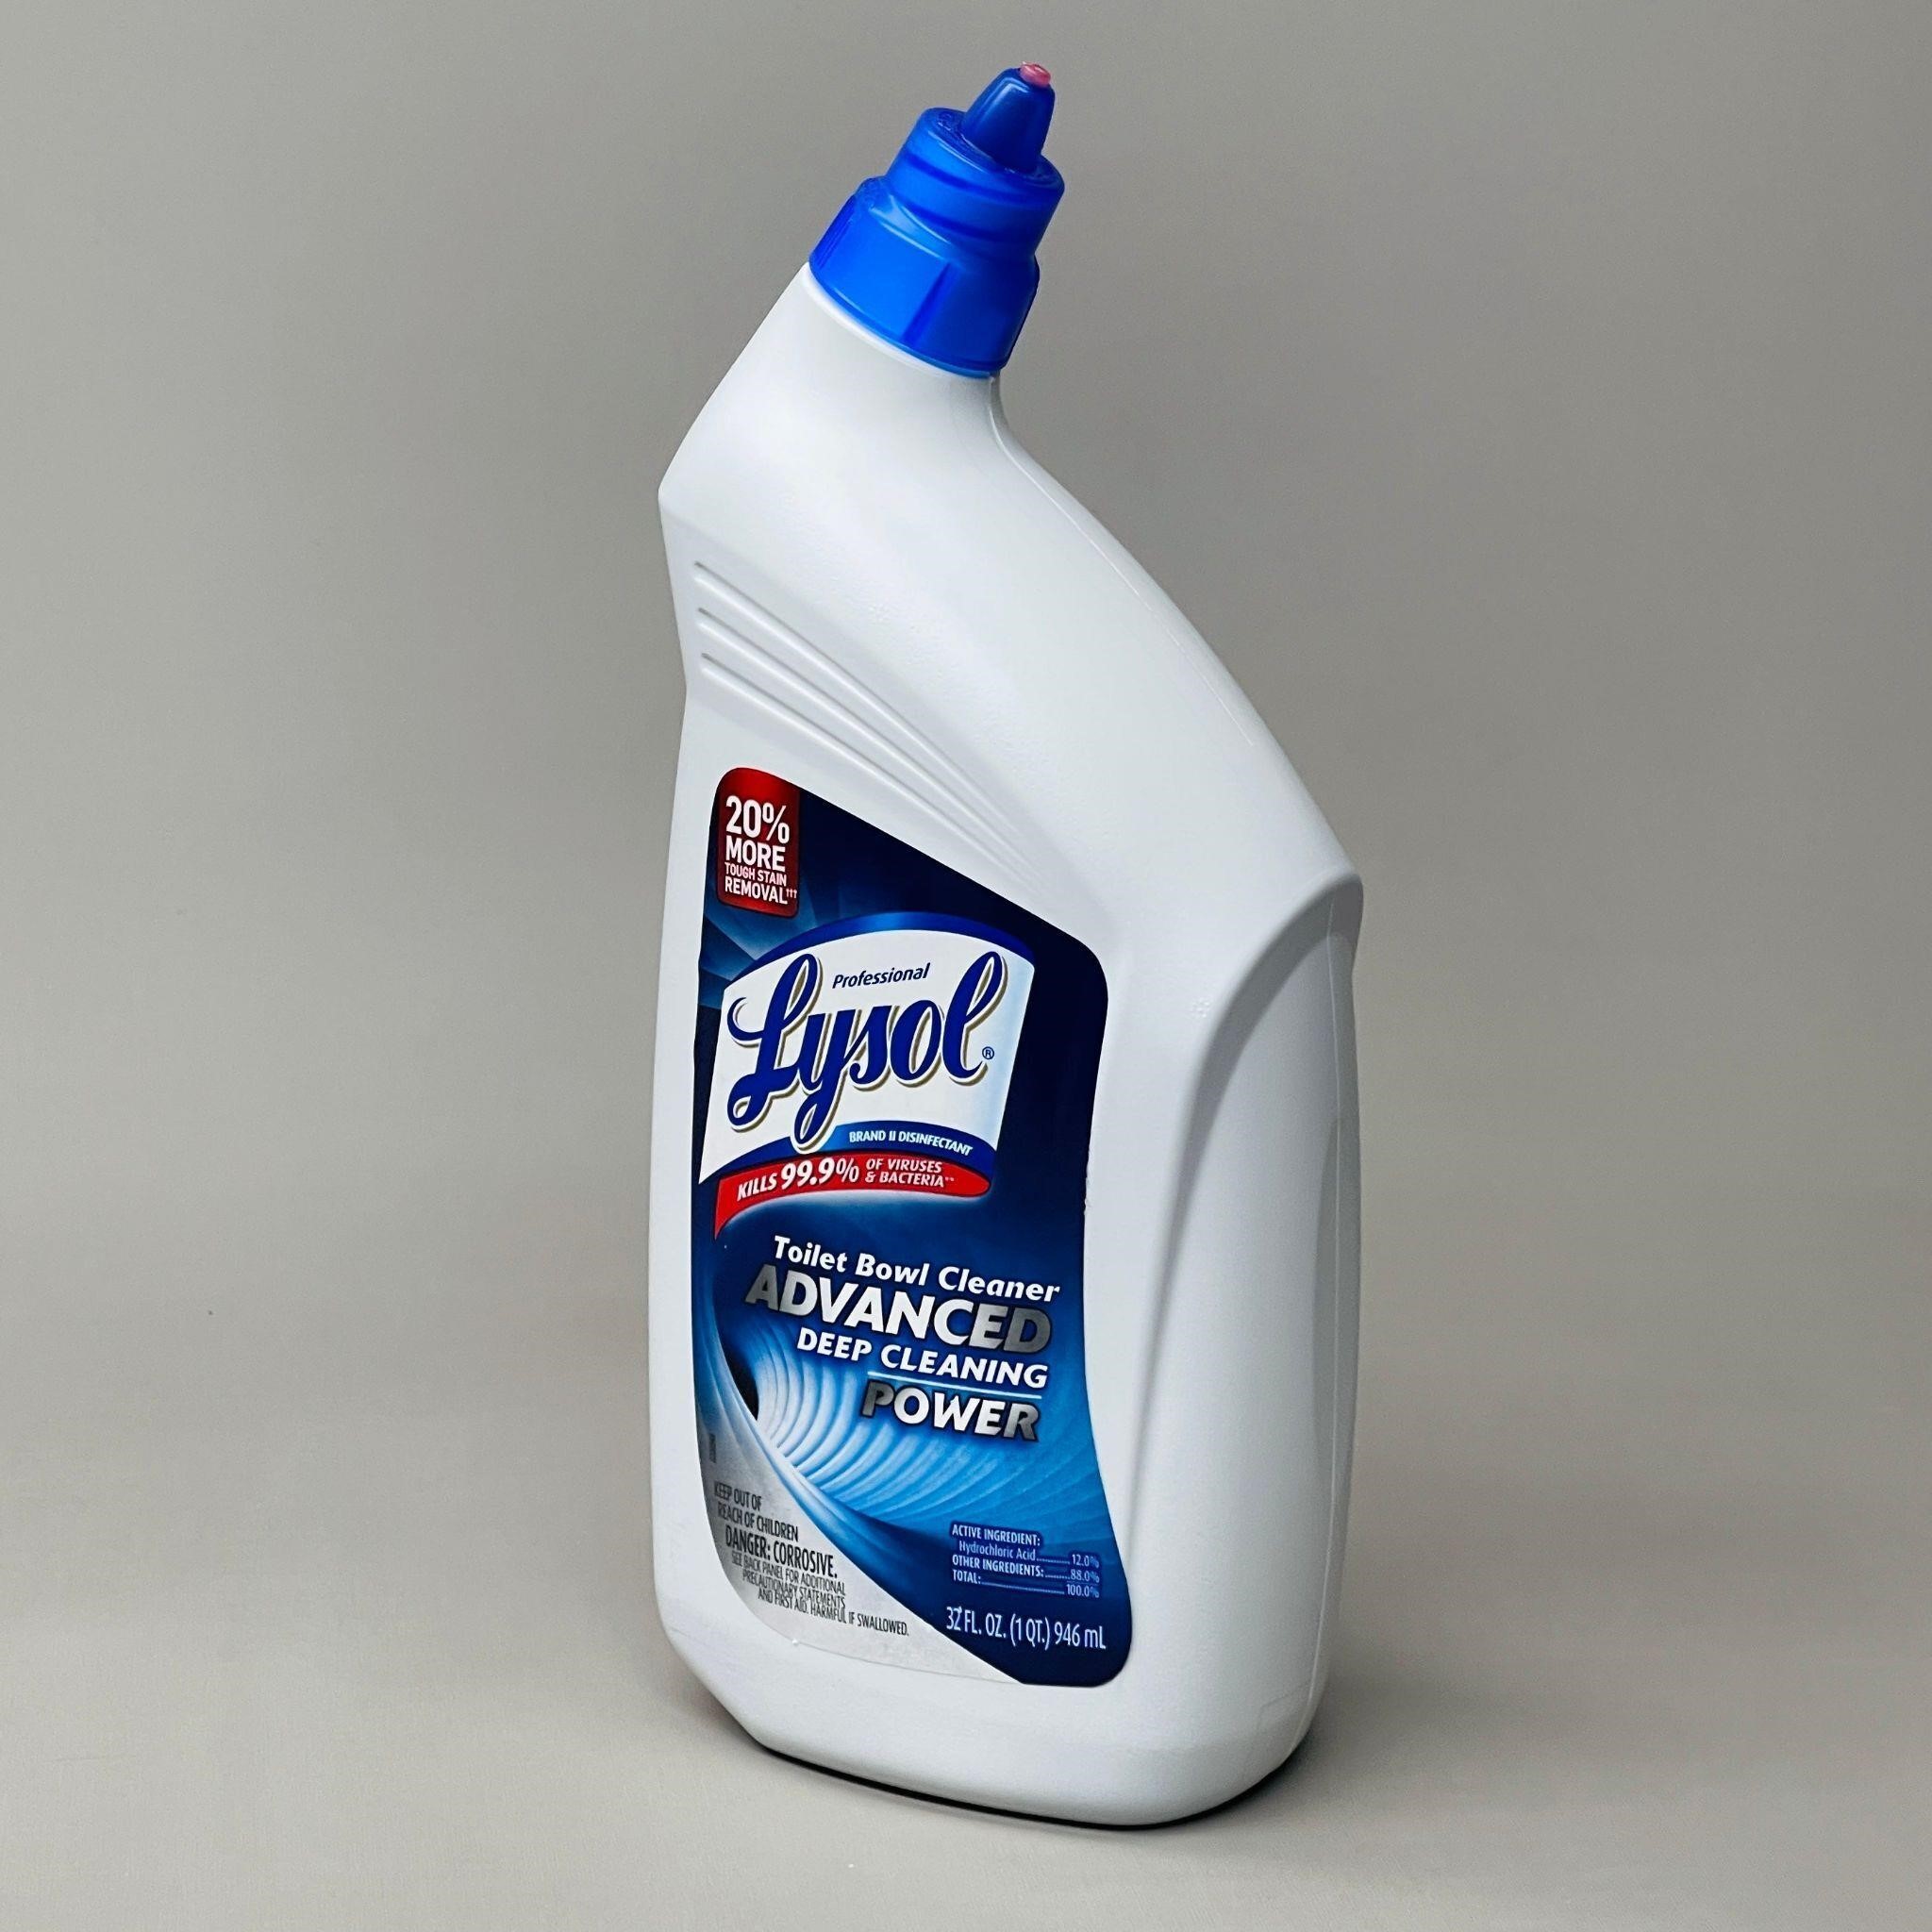 LYSOL Toilet Bowl Cleaner 4-PACK! Advanced Power